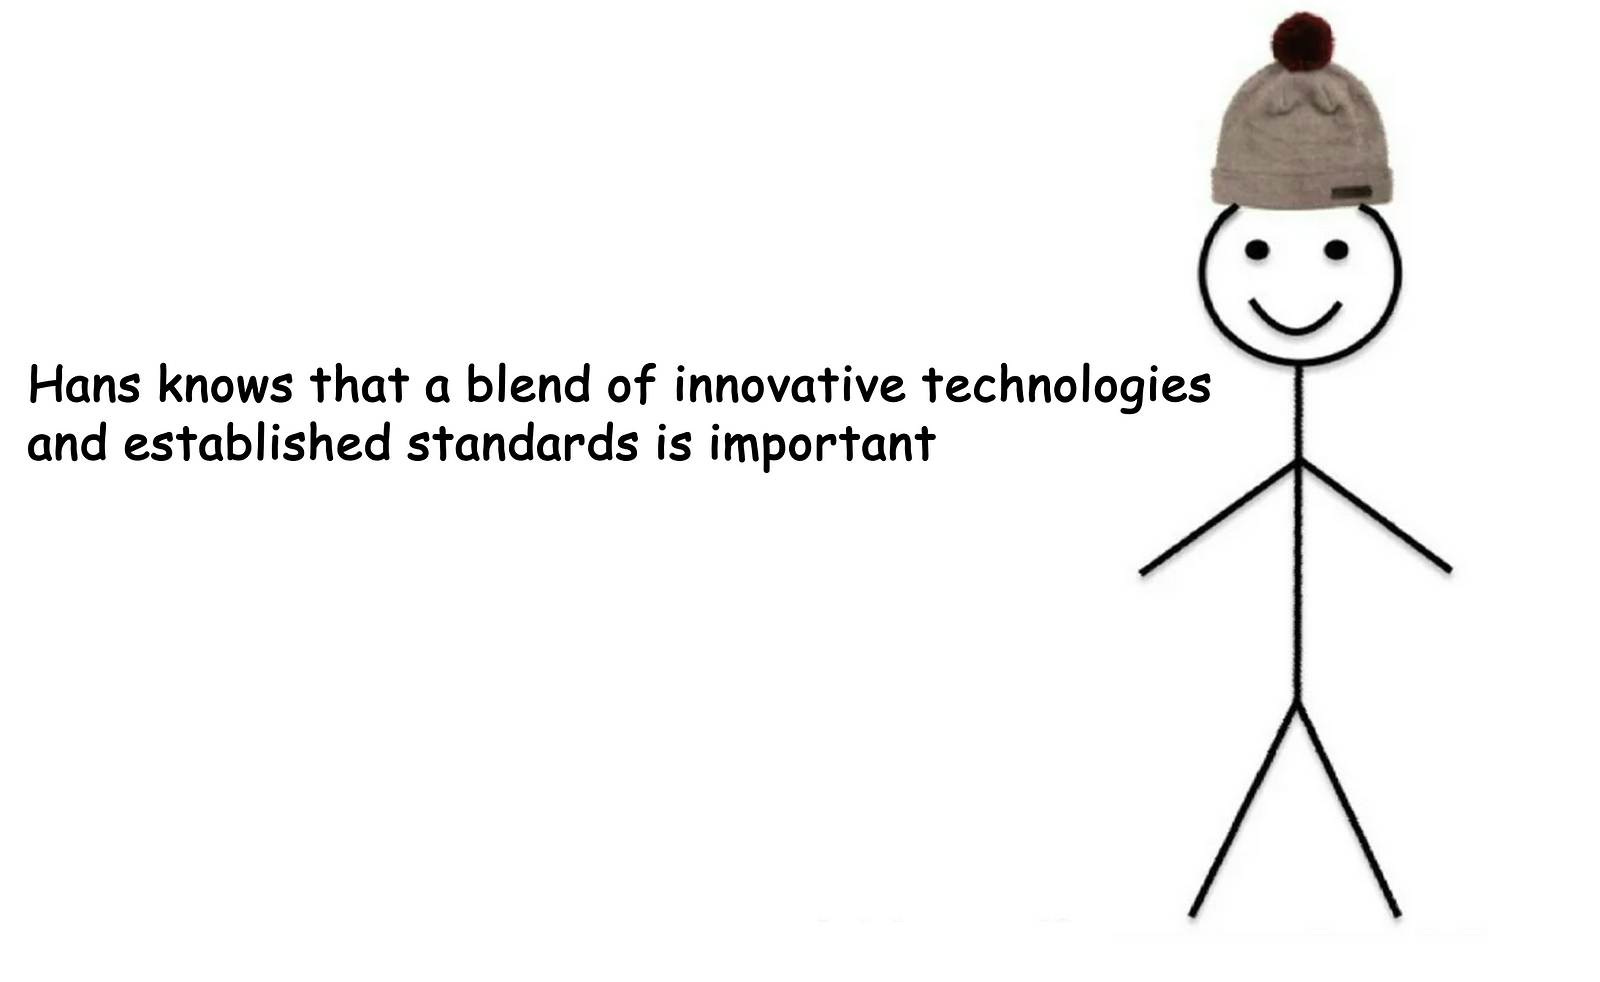 Hans knows that a blend of innovative technologies and established standards is important